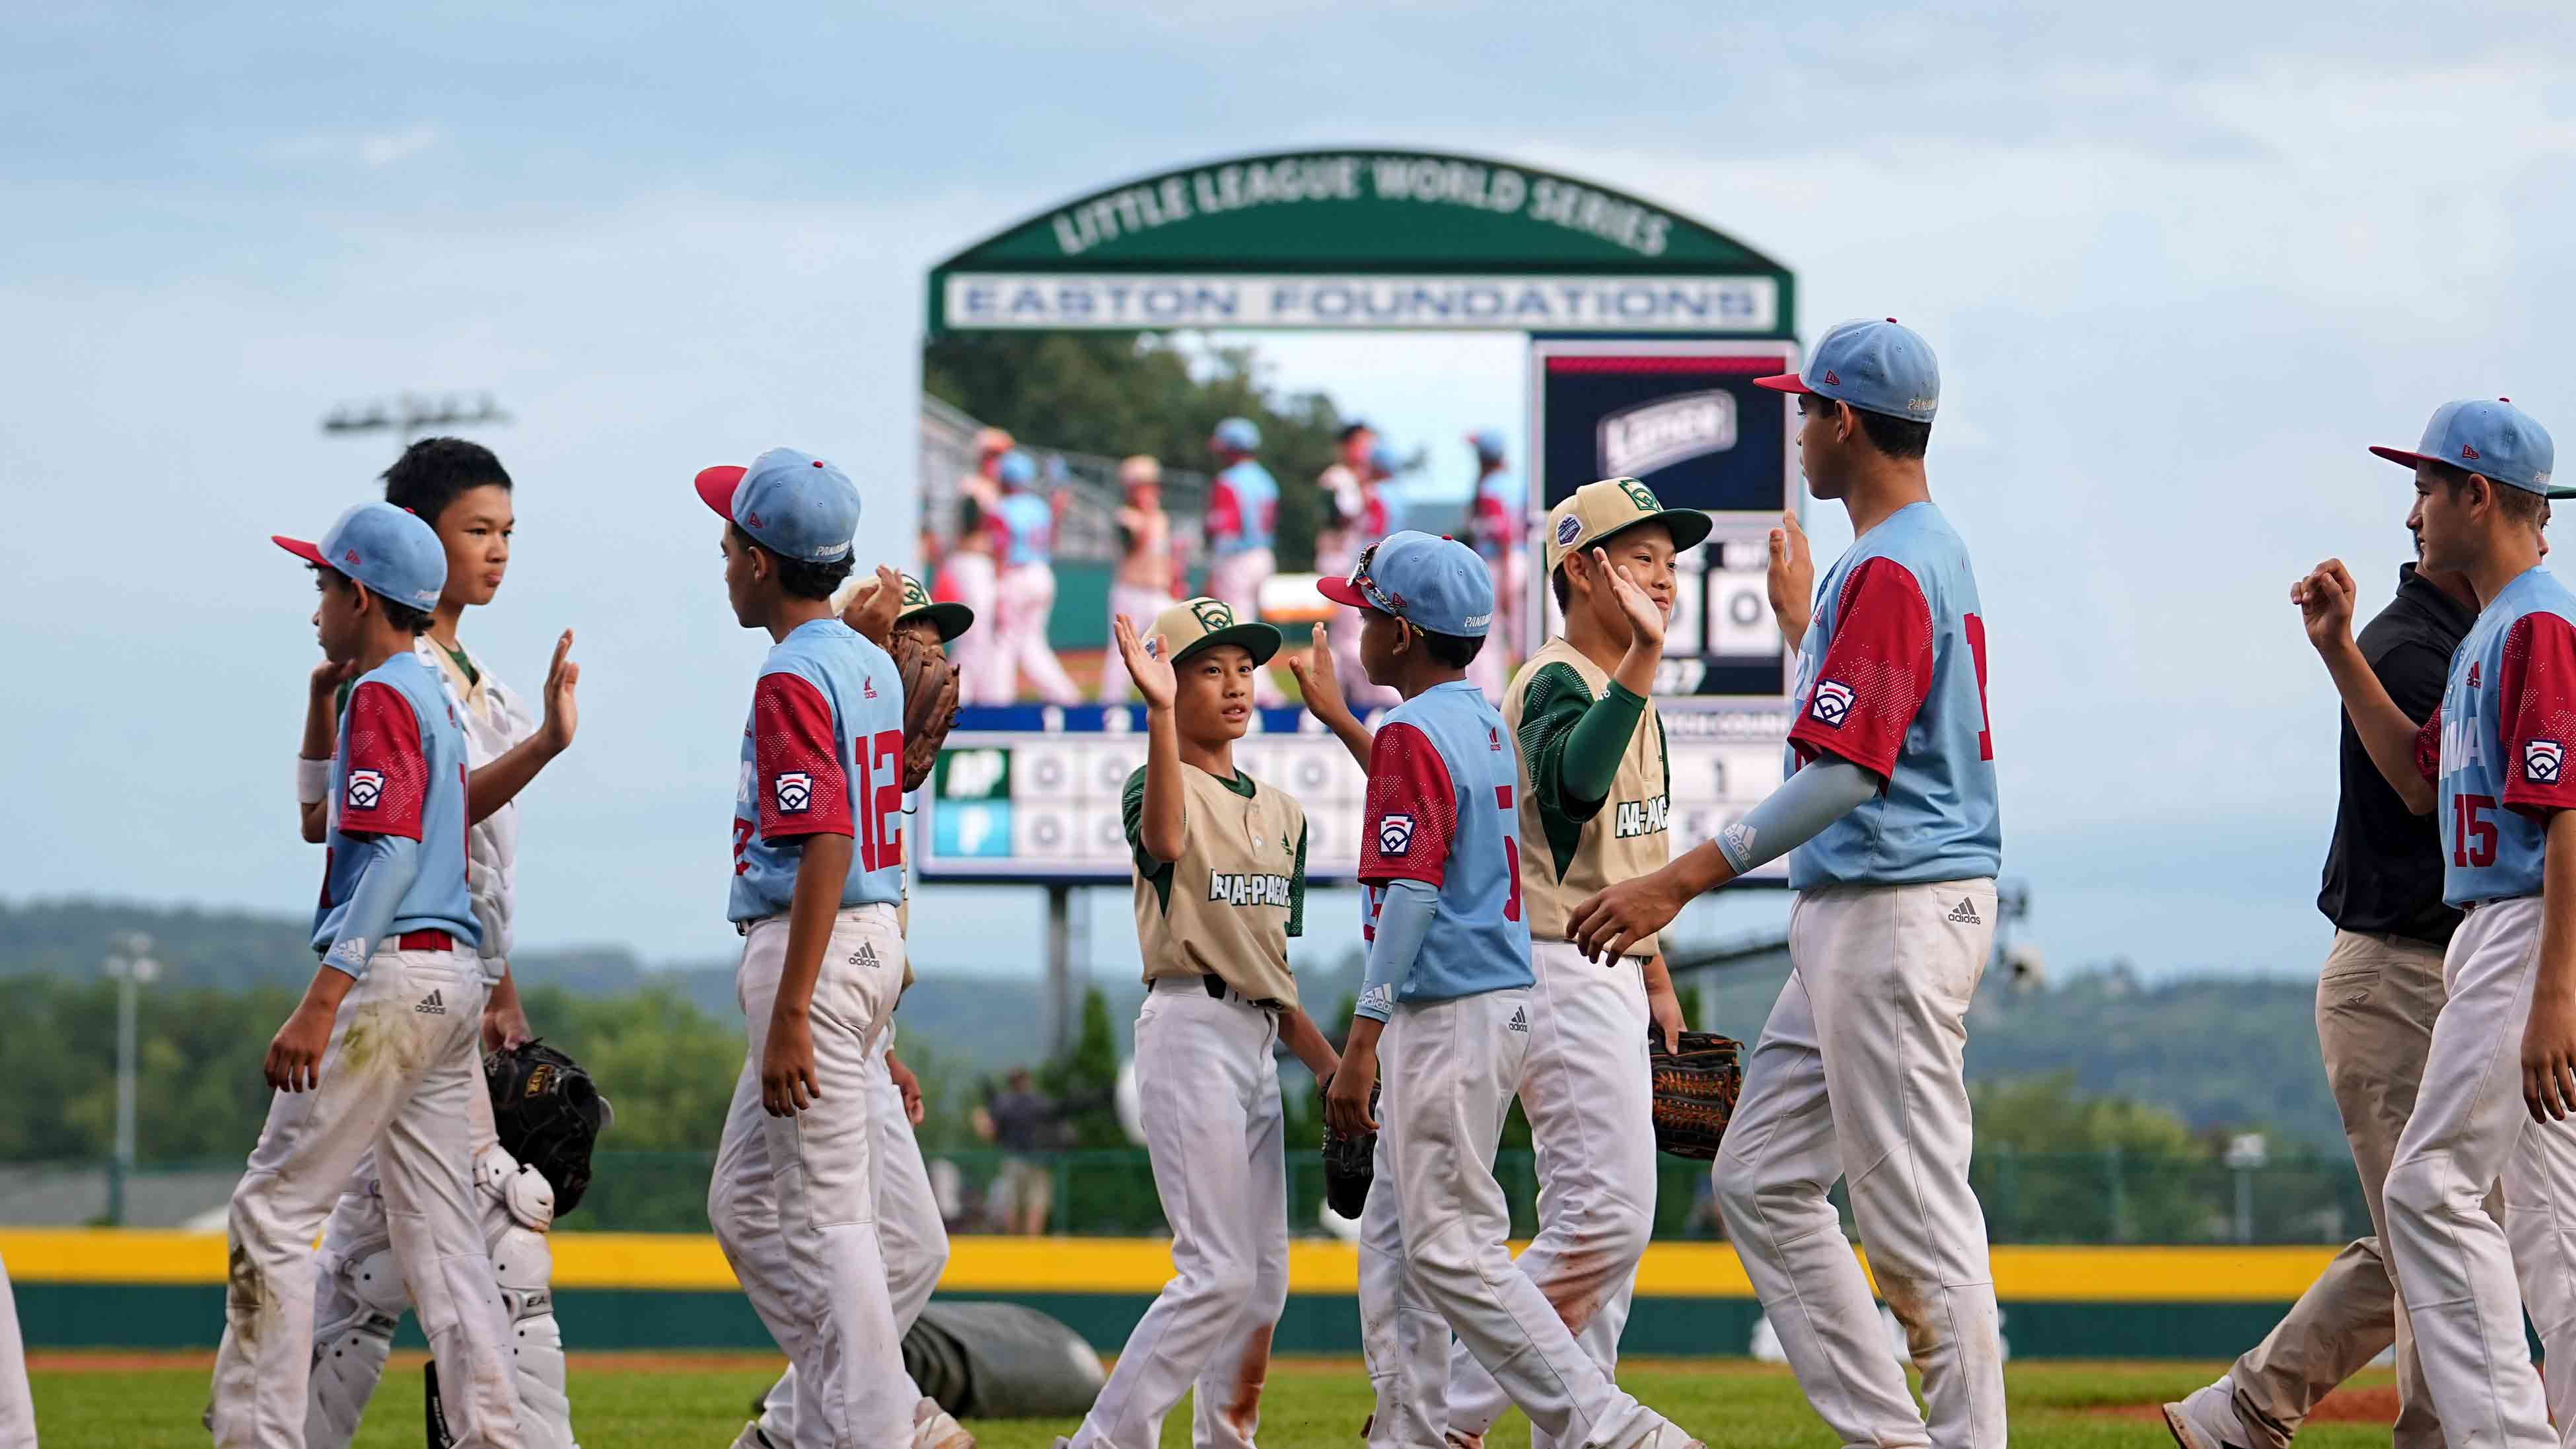 Little League World Series is back with 4 more teams in